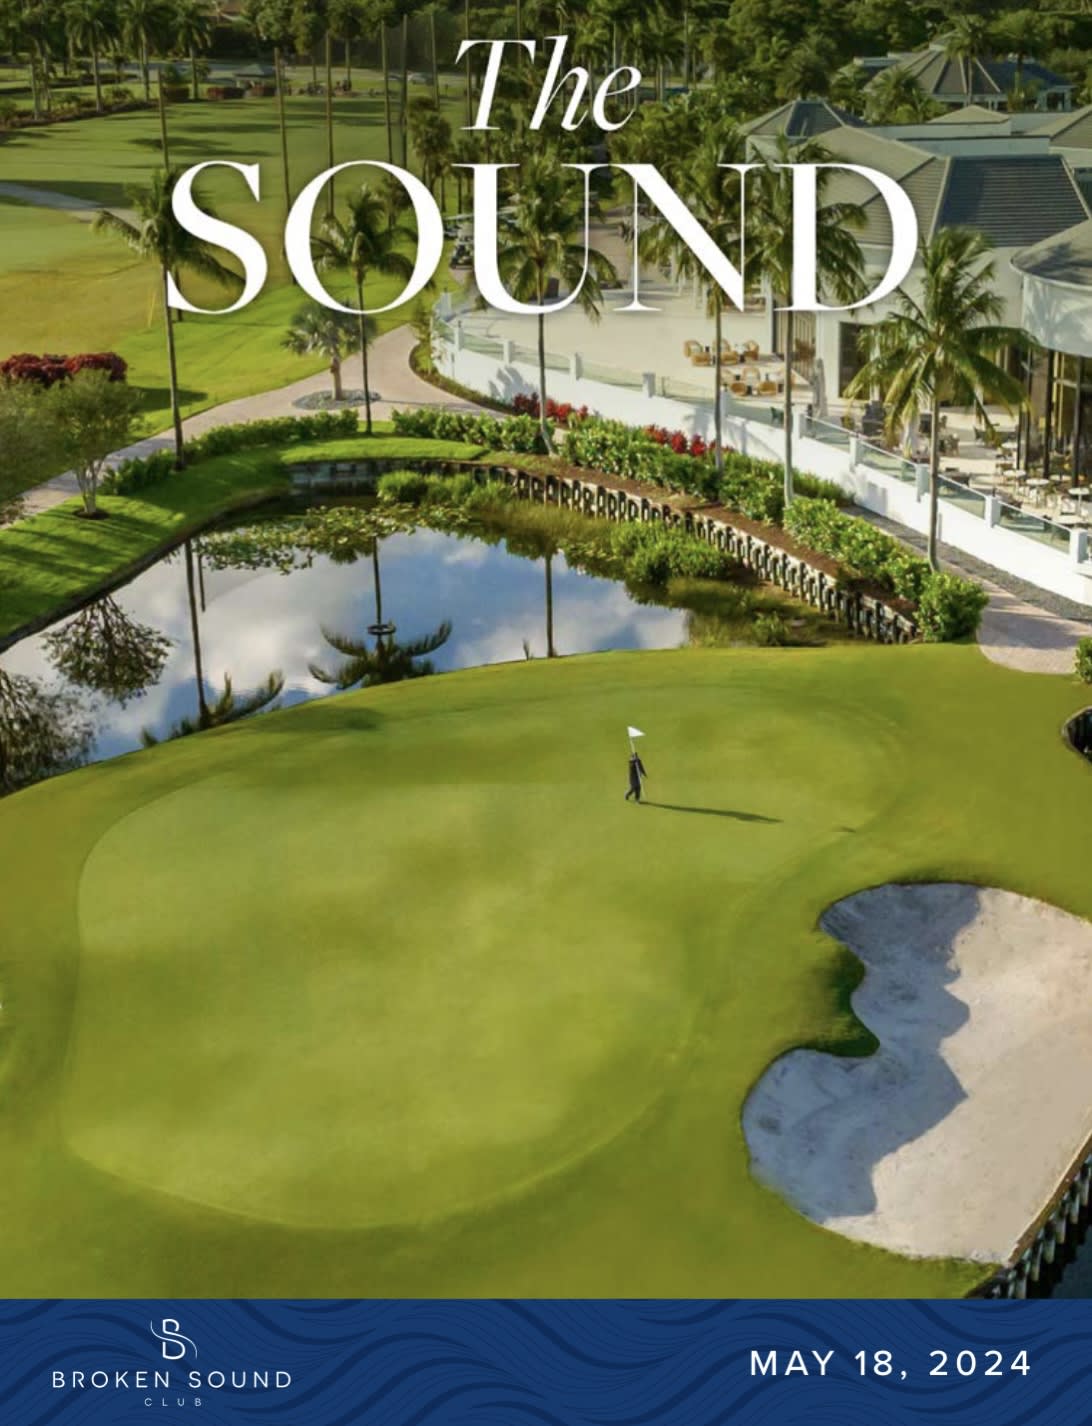 The Sound - May 18, 2024